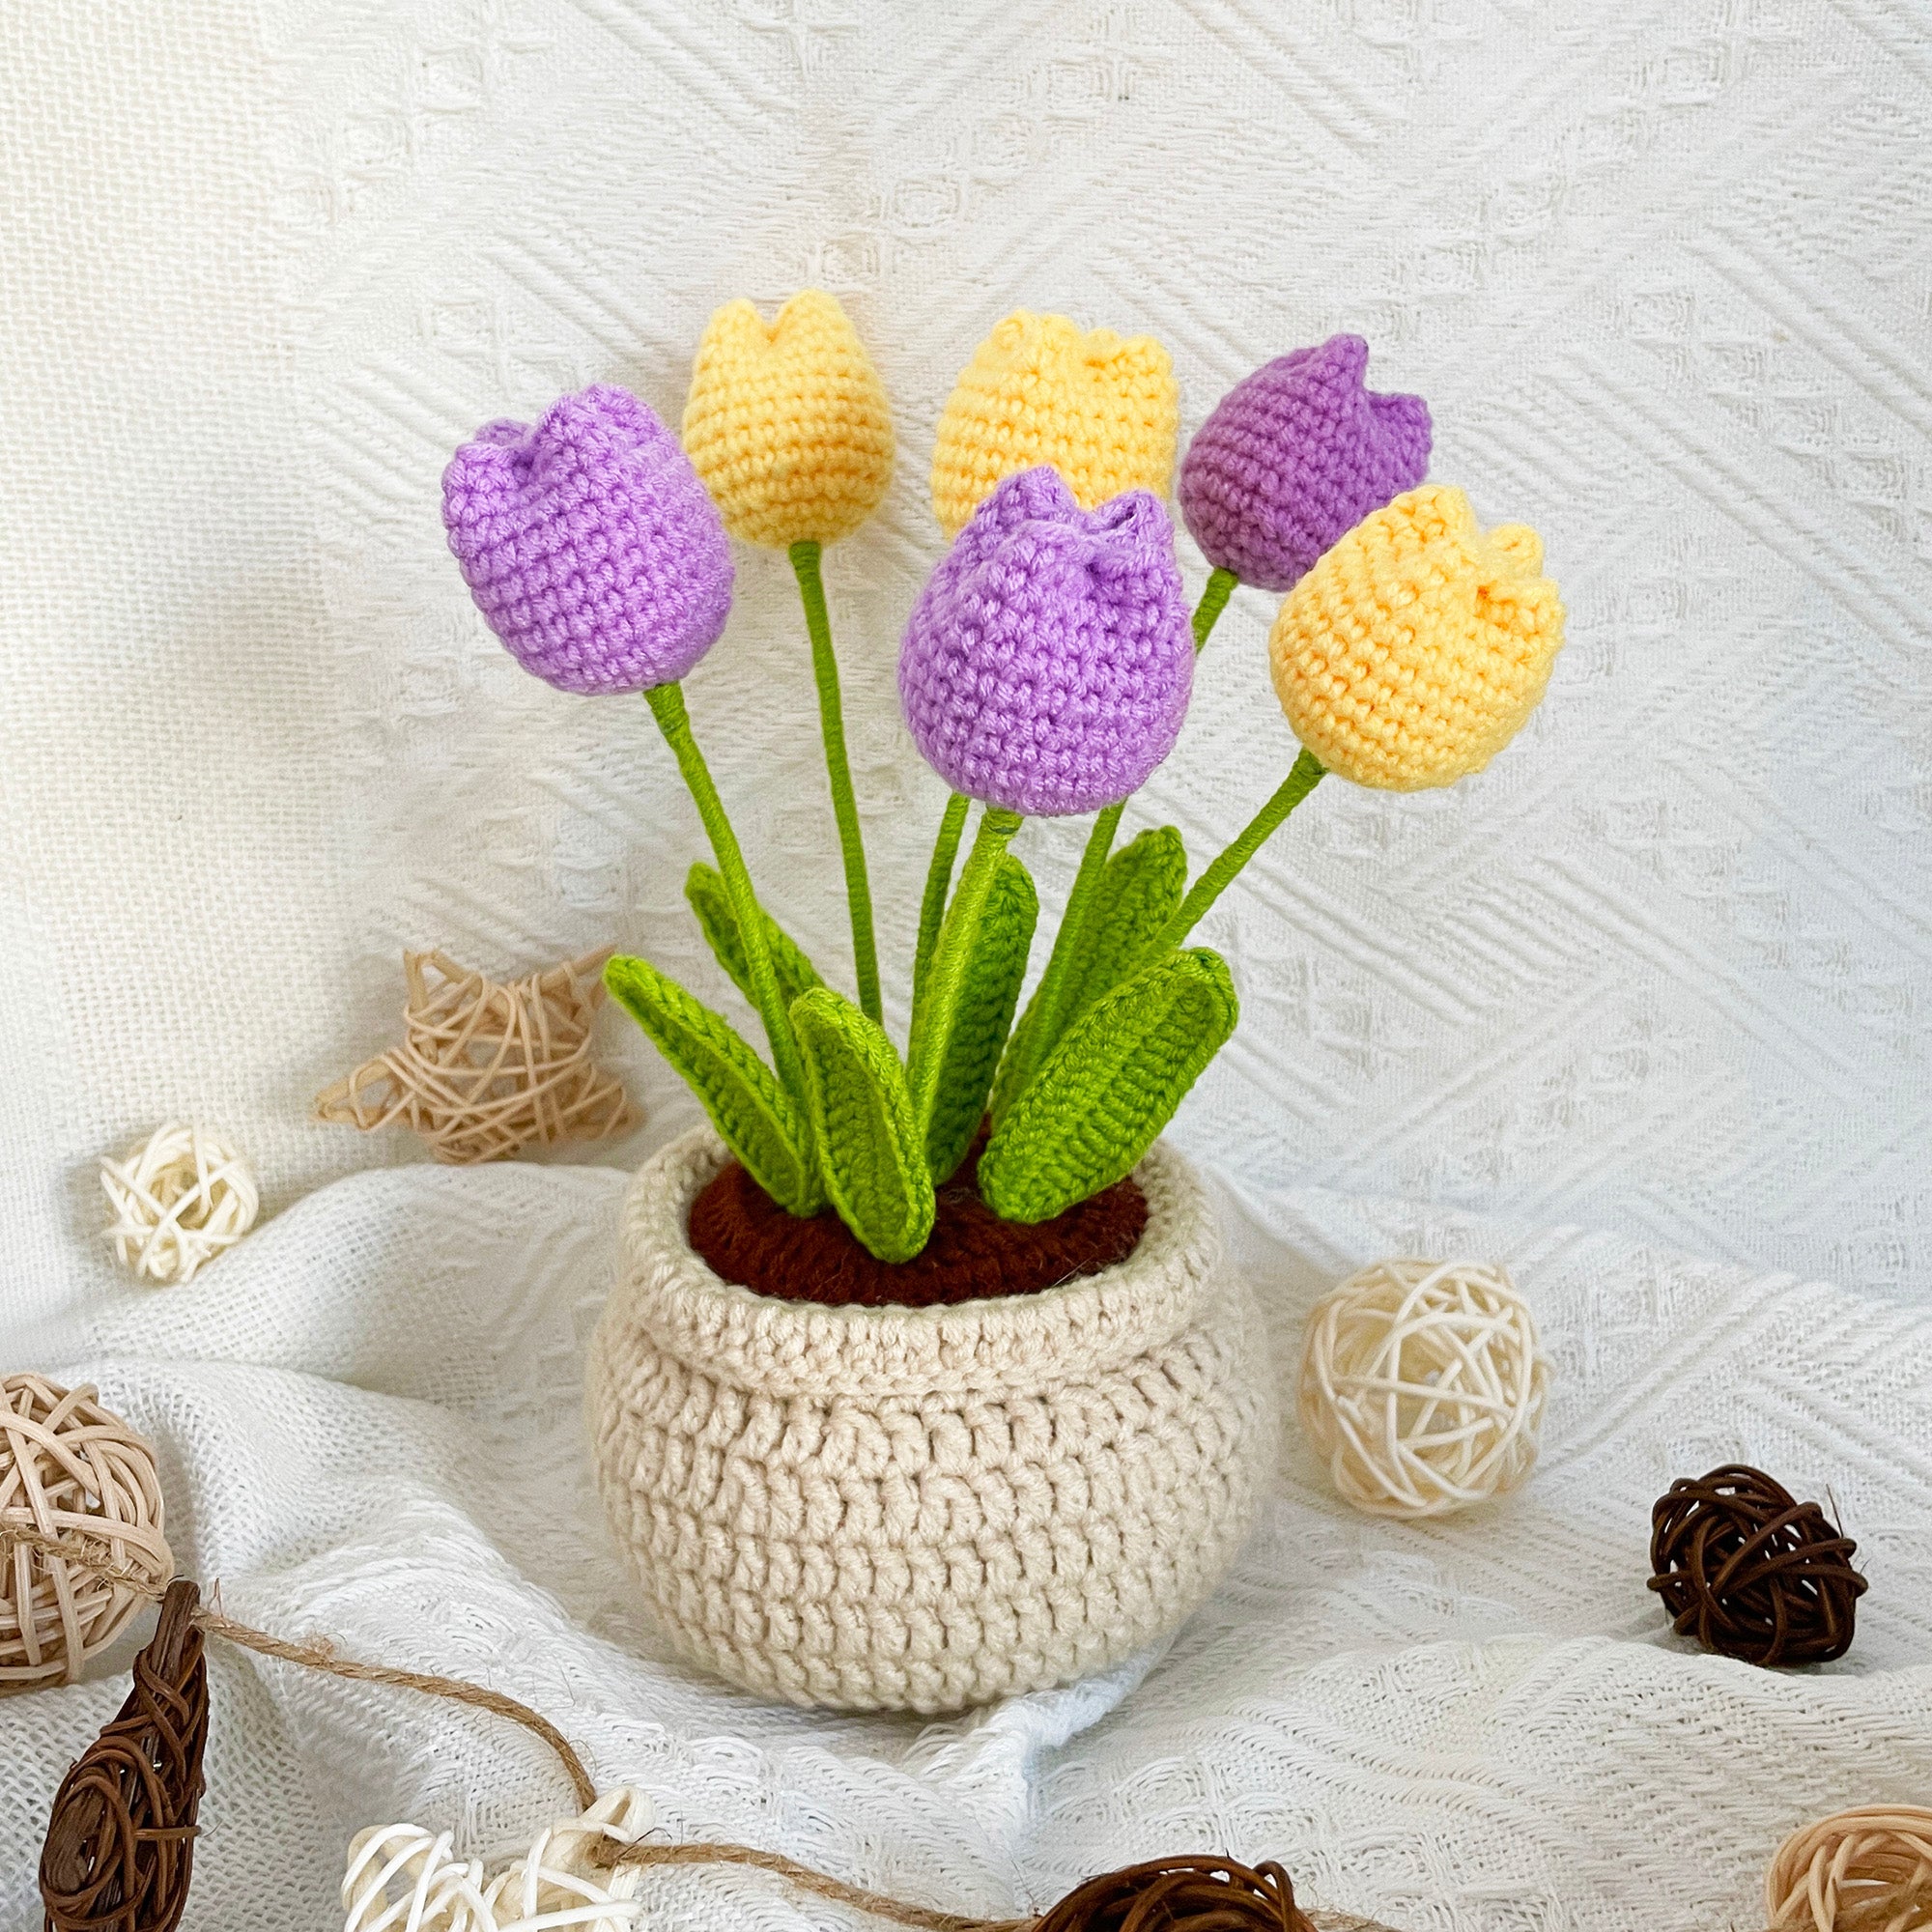 Cuteeeshop White Flowers and Potted Plants Beginners Crochet Kit with Easy  Peasy Yarn